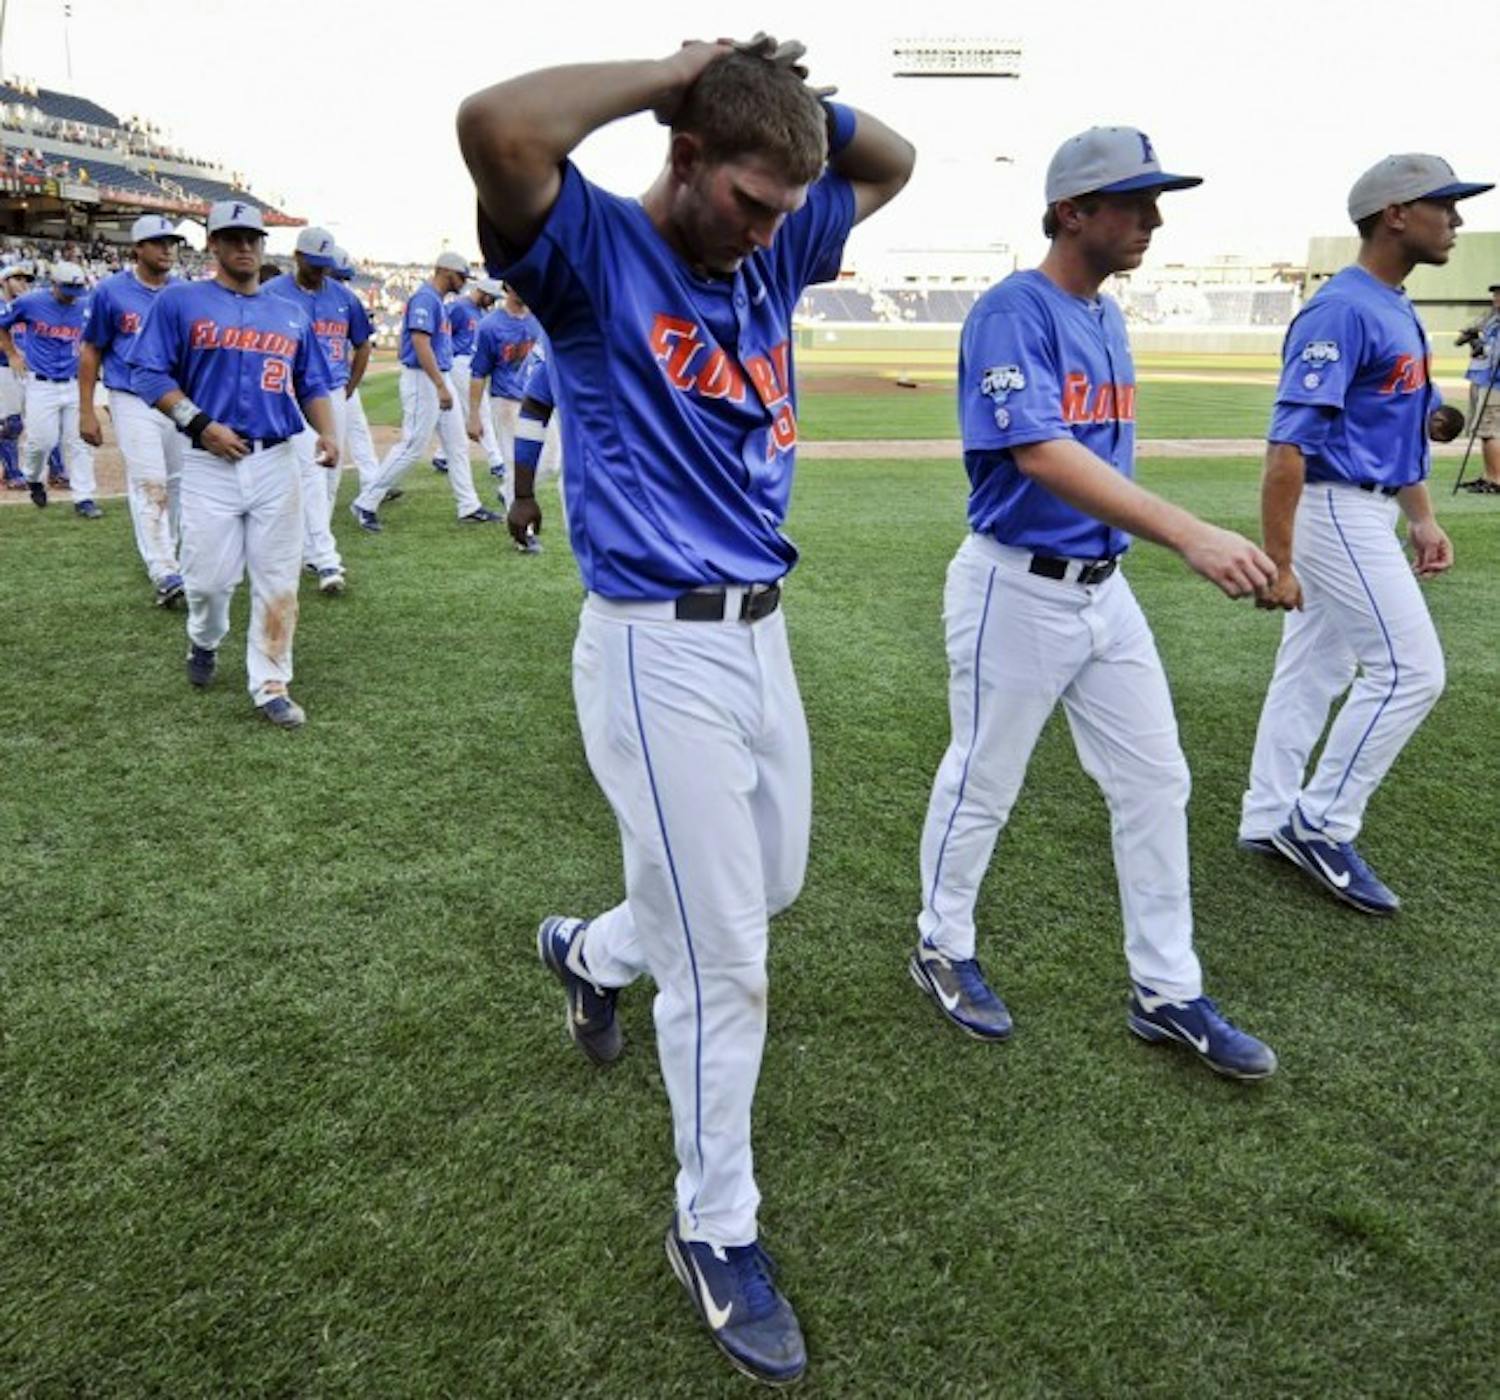 Freshman Justin Shafer walks off the field in dismay after dropping two straight games and failing to advance in the 2012 CWS. He went 2 for 5 with one RBI and stranded four runners on base in a 5-4 loss to Kent State on Monday.